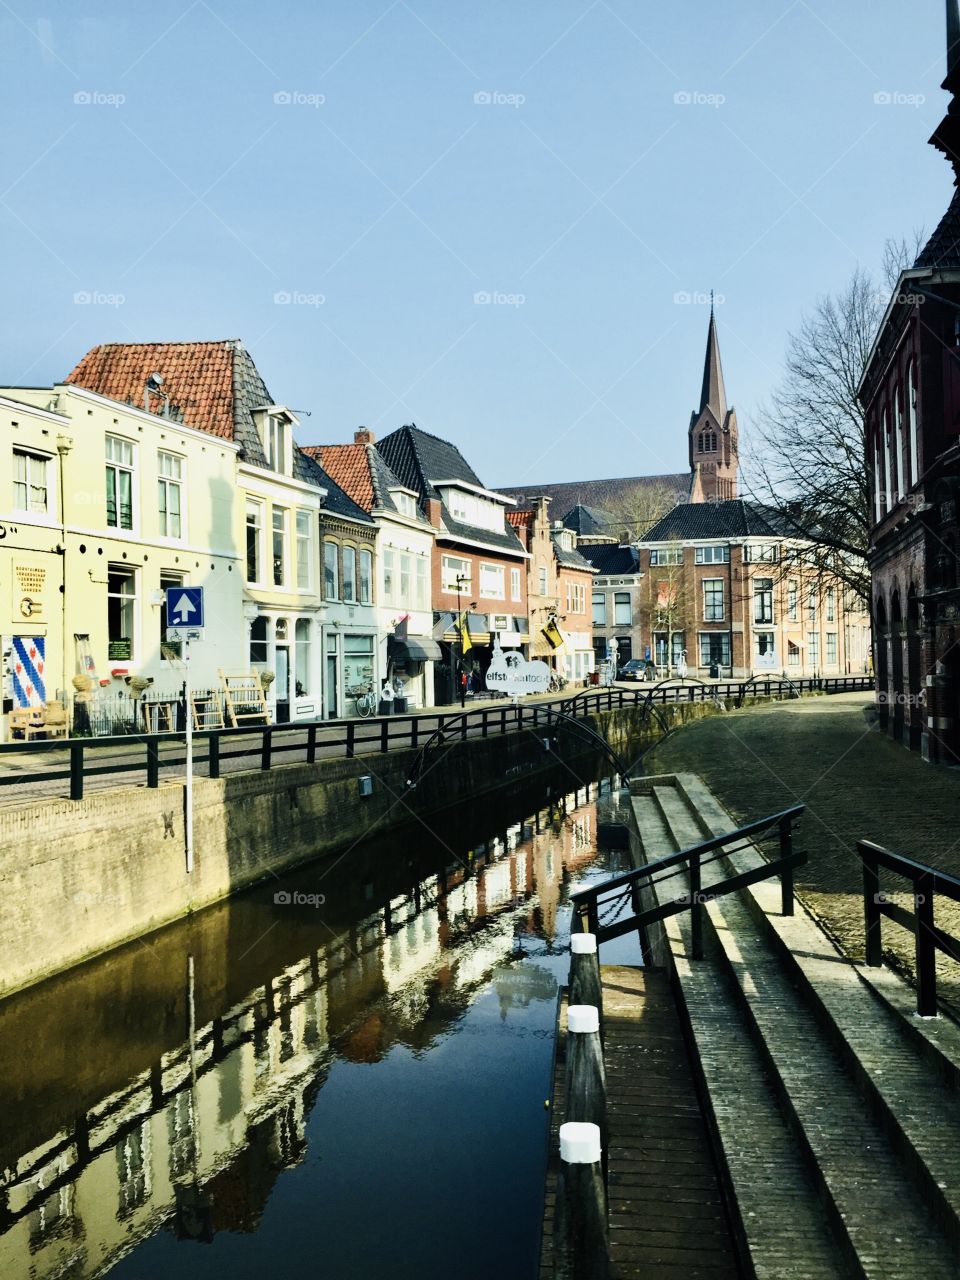 Canals That Run through Our City 